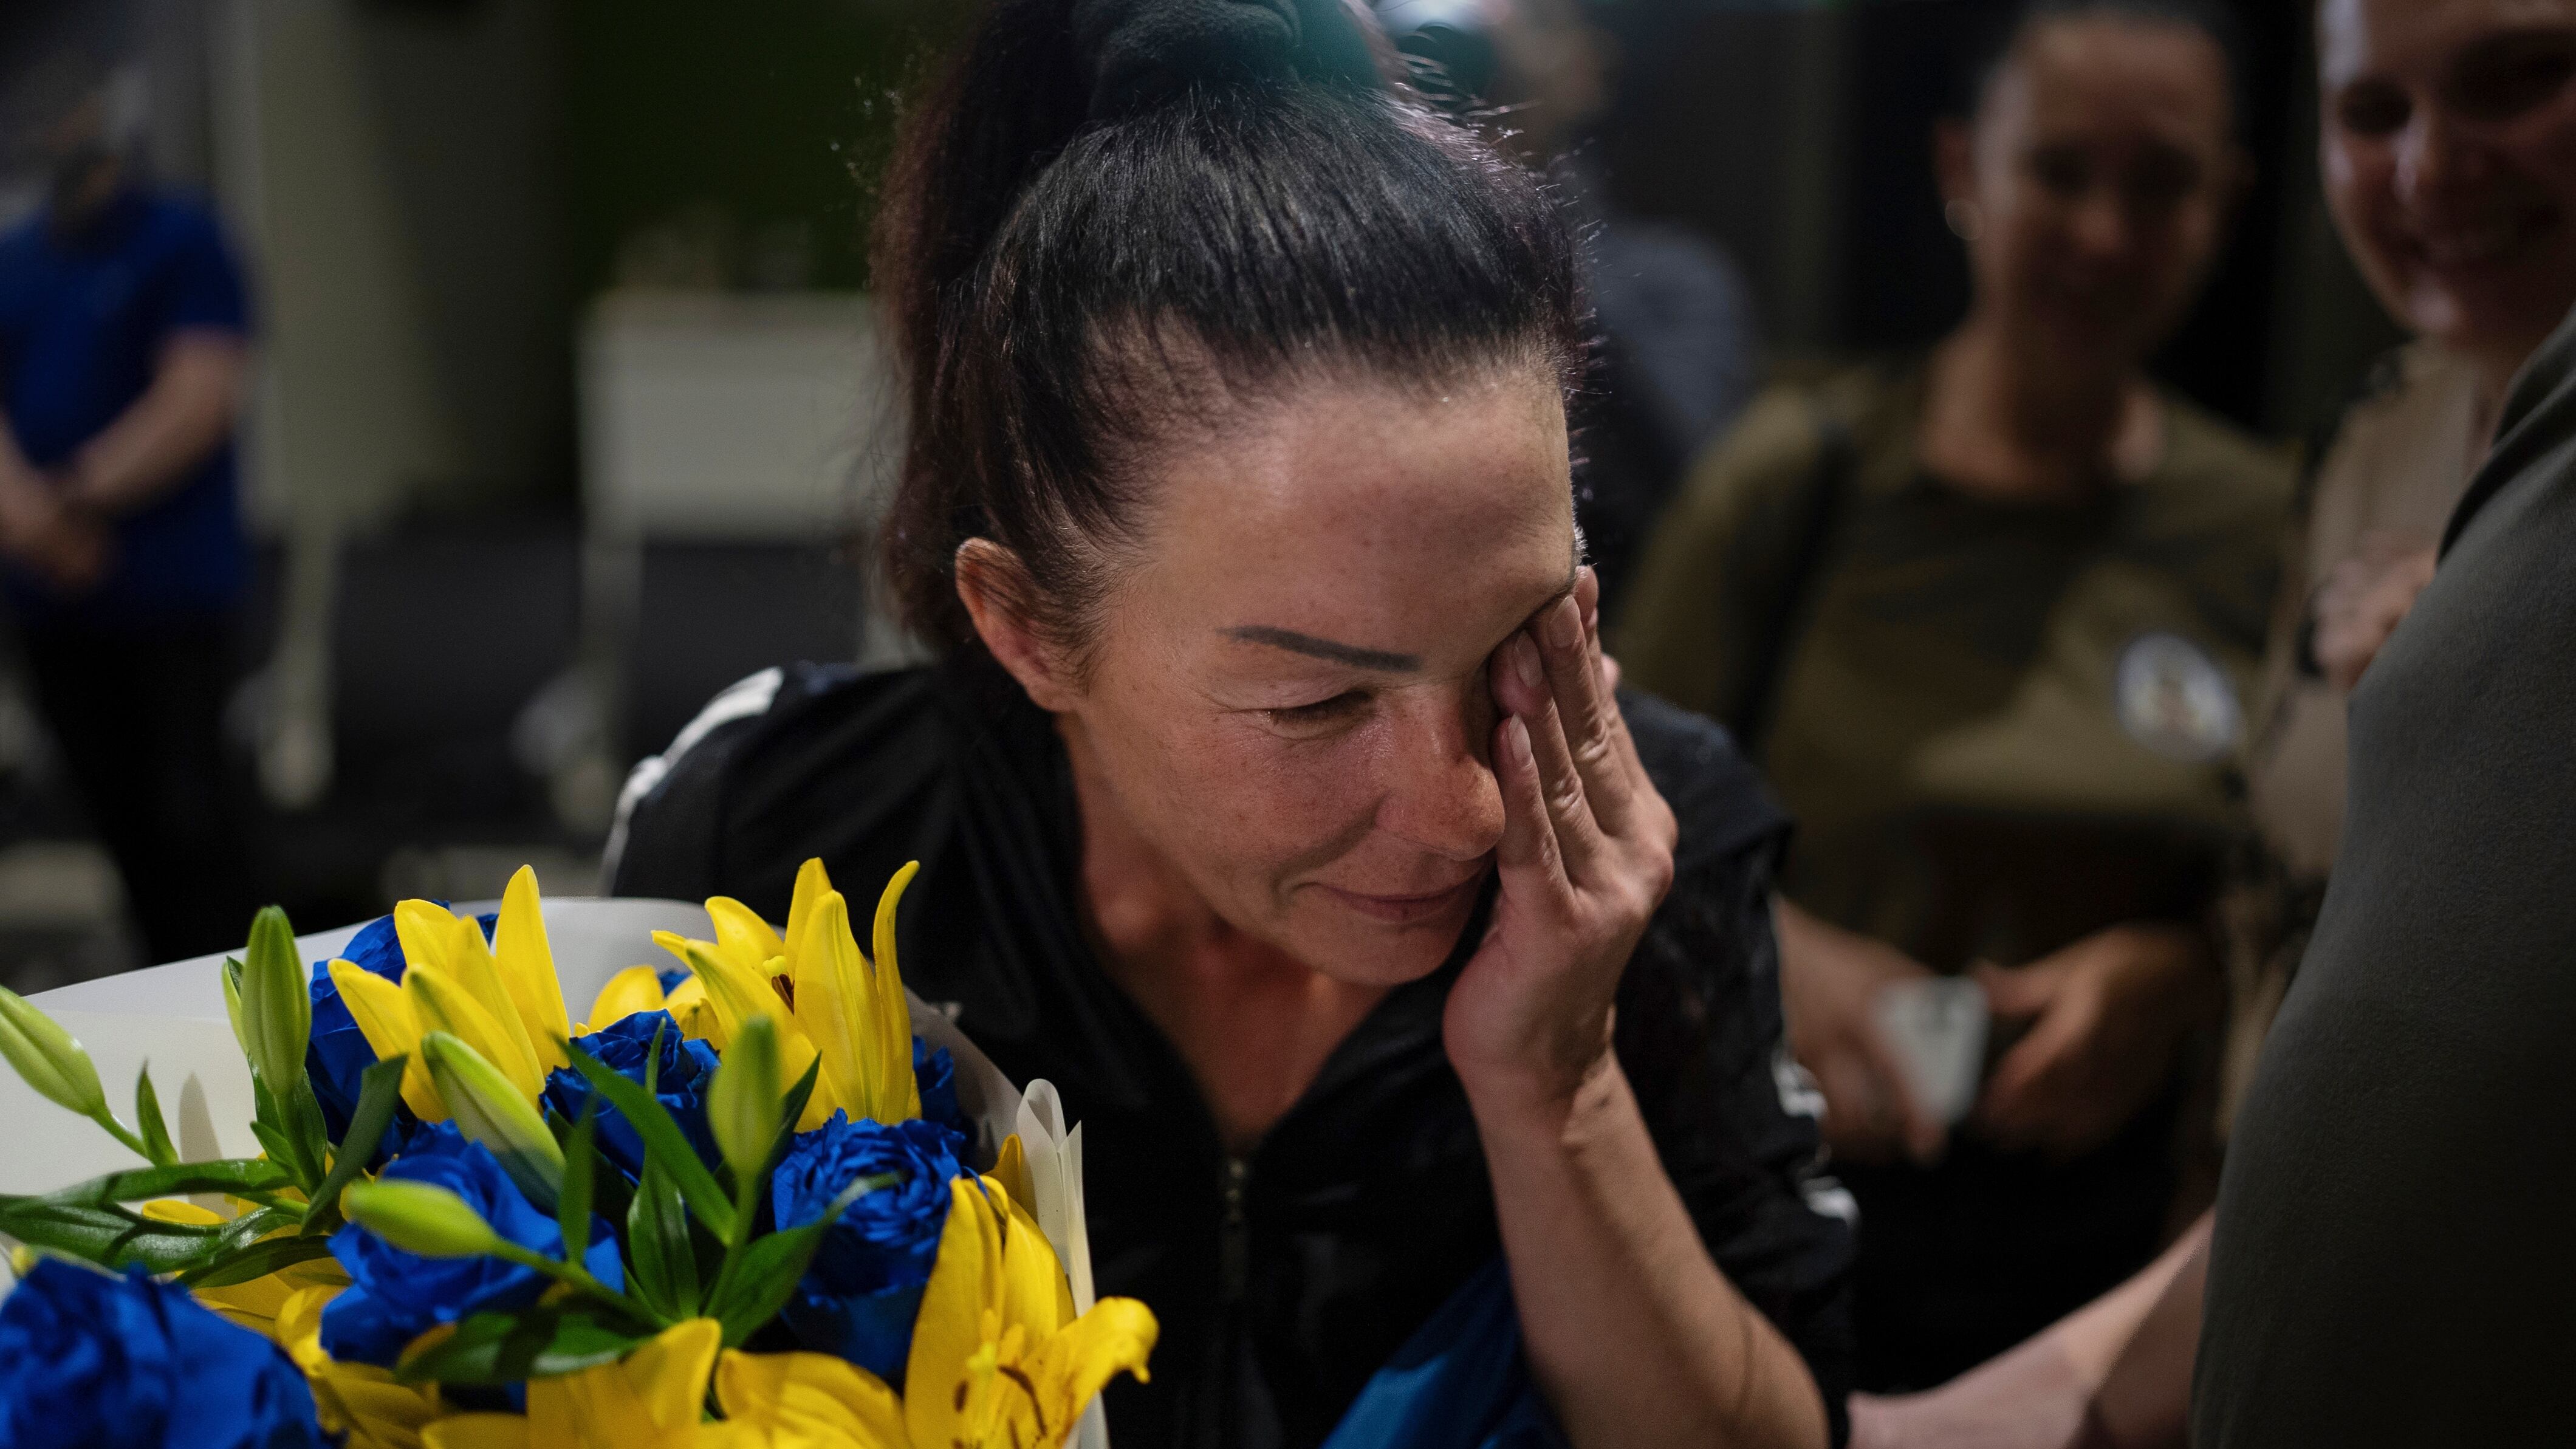 Olena Pekh cries while she speaks to her daughter via a video call in Kyiv (Alex Babenko)